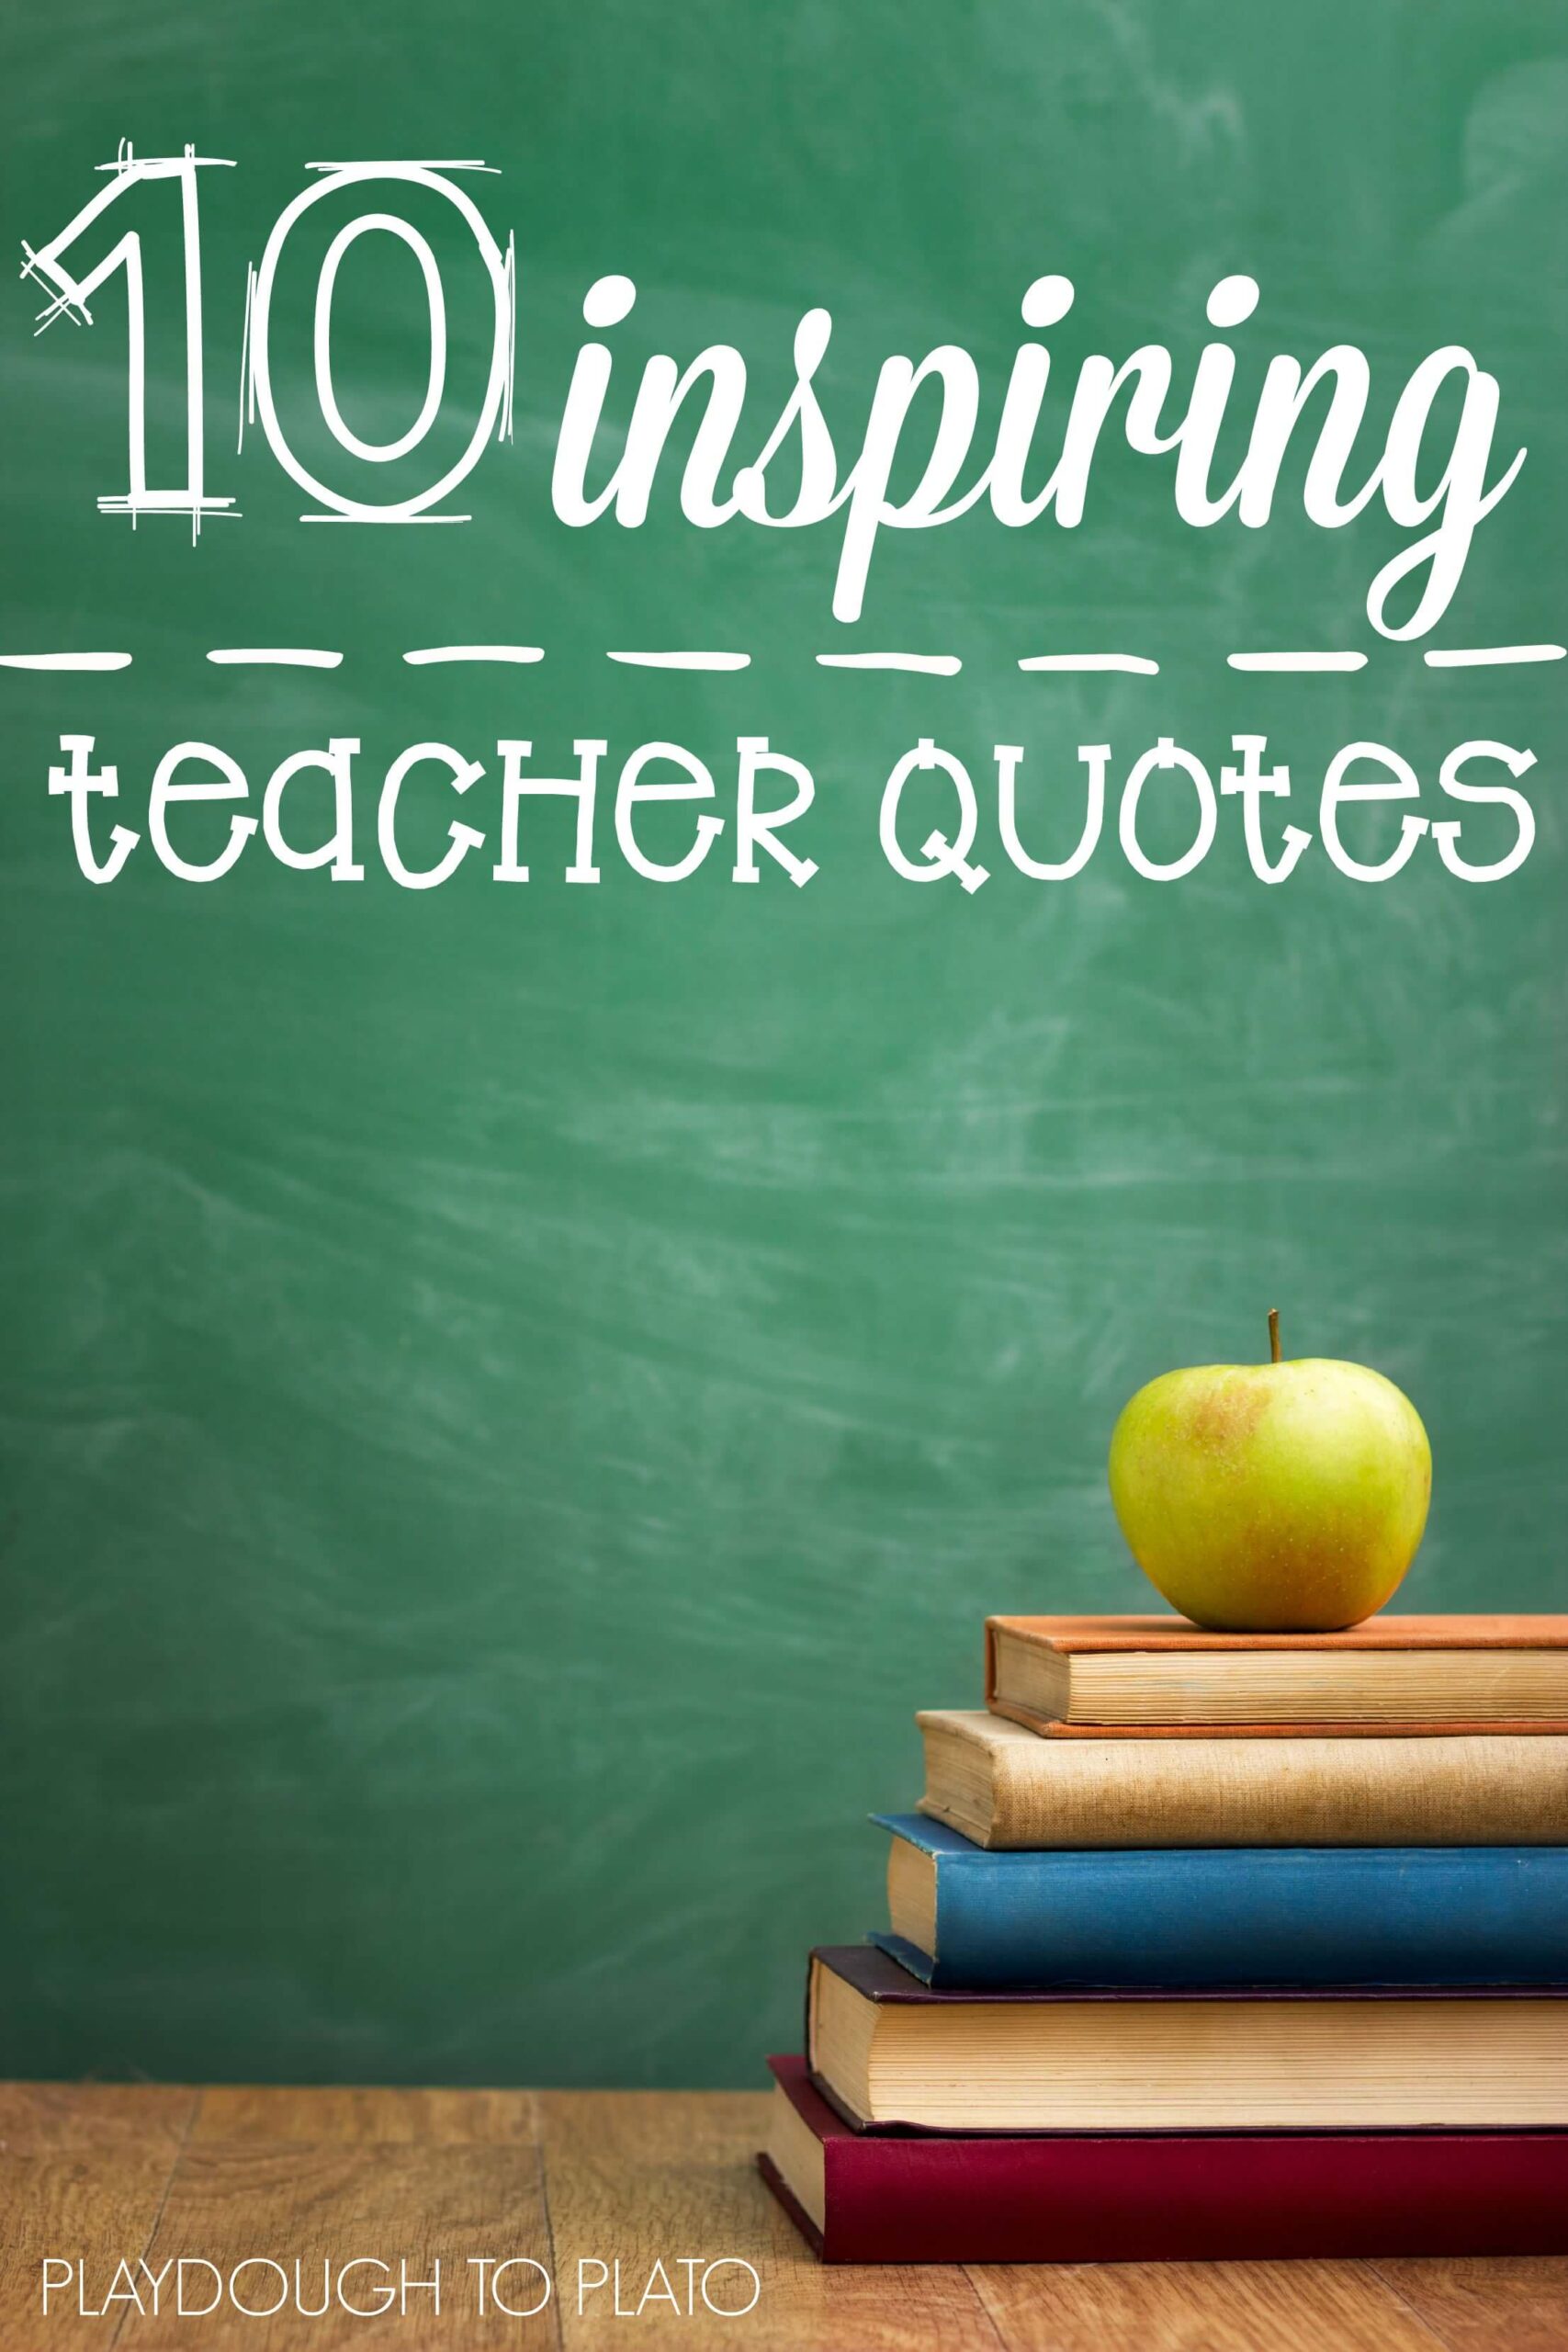 10 inspiring teacher quotes from Playdough to Plato scaled - Kindergarten Becoming Academic